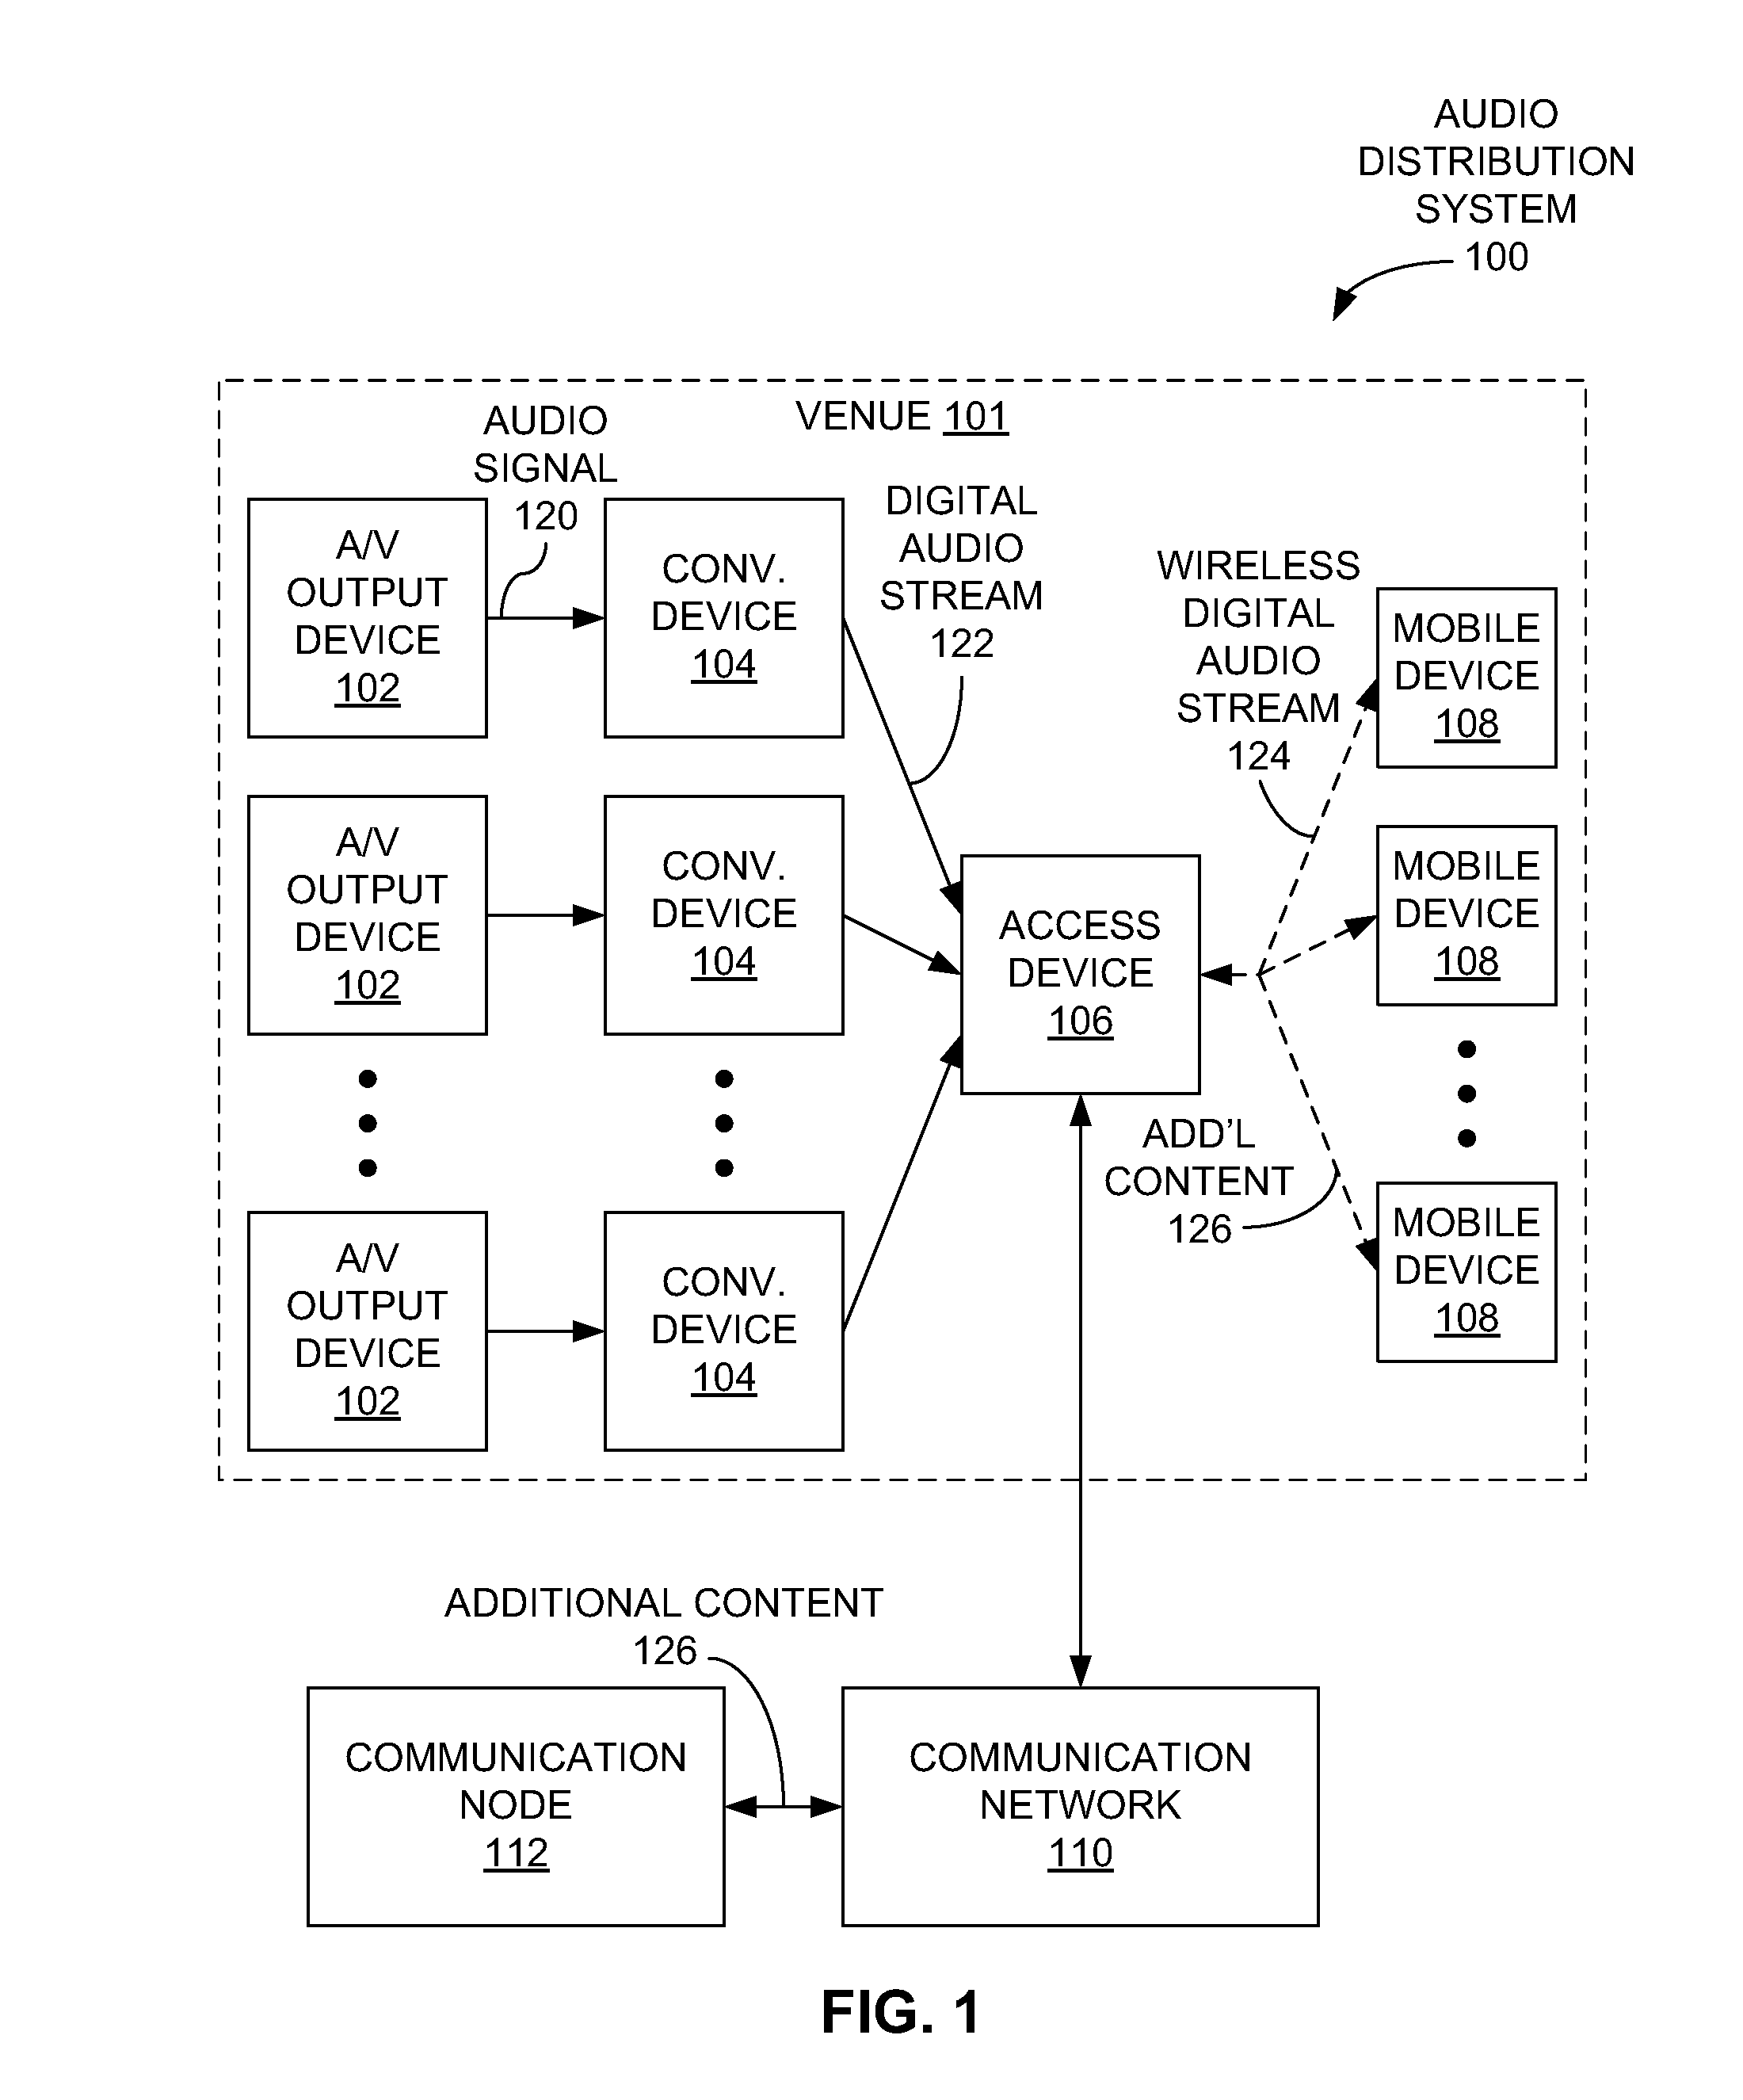 Systems and methods for providing multiple audio streams in a venue